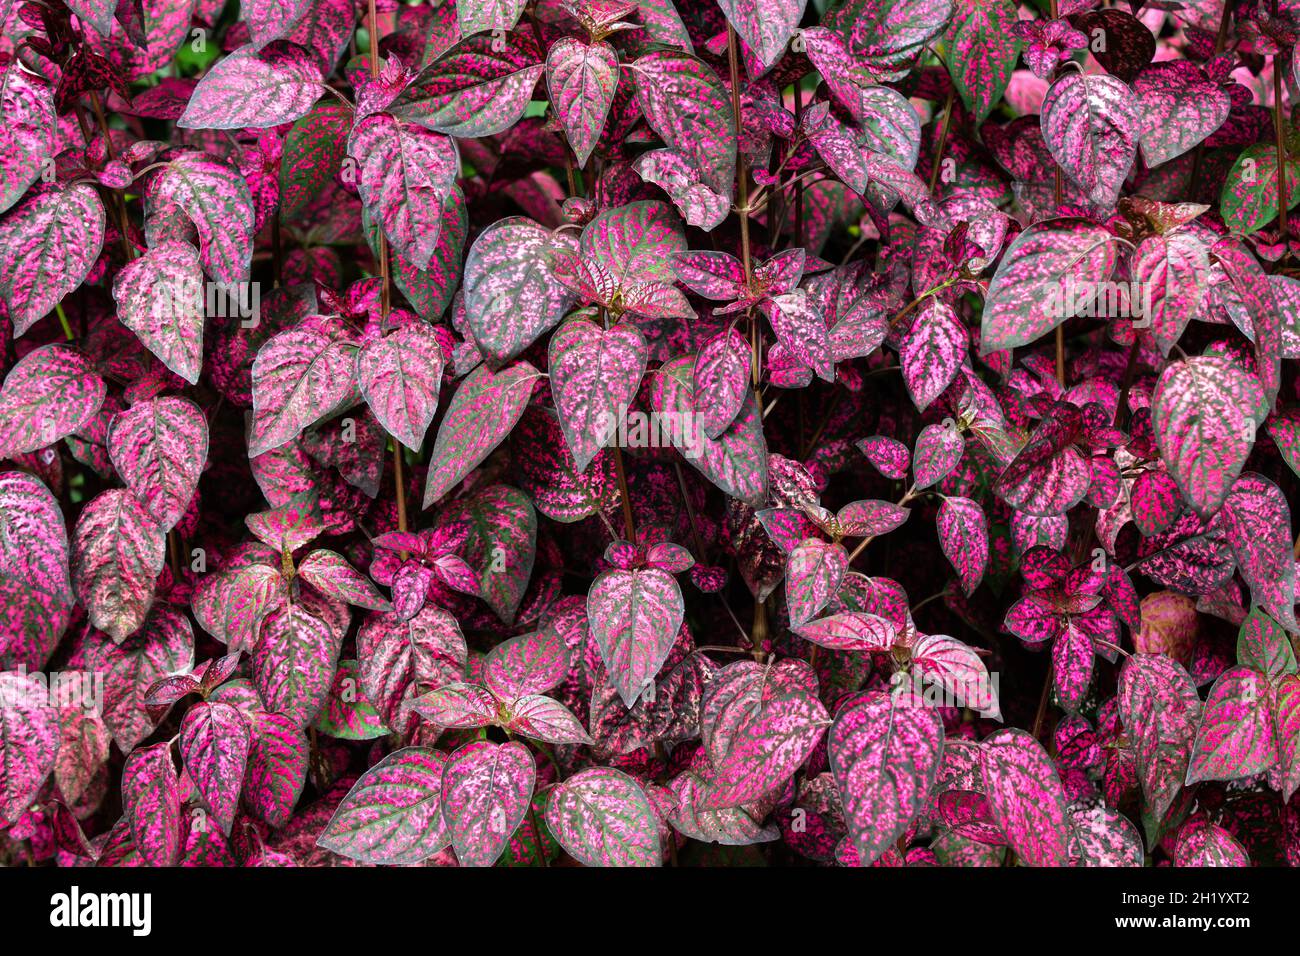 Green and pink leafs Stock Photo